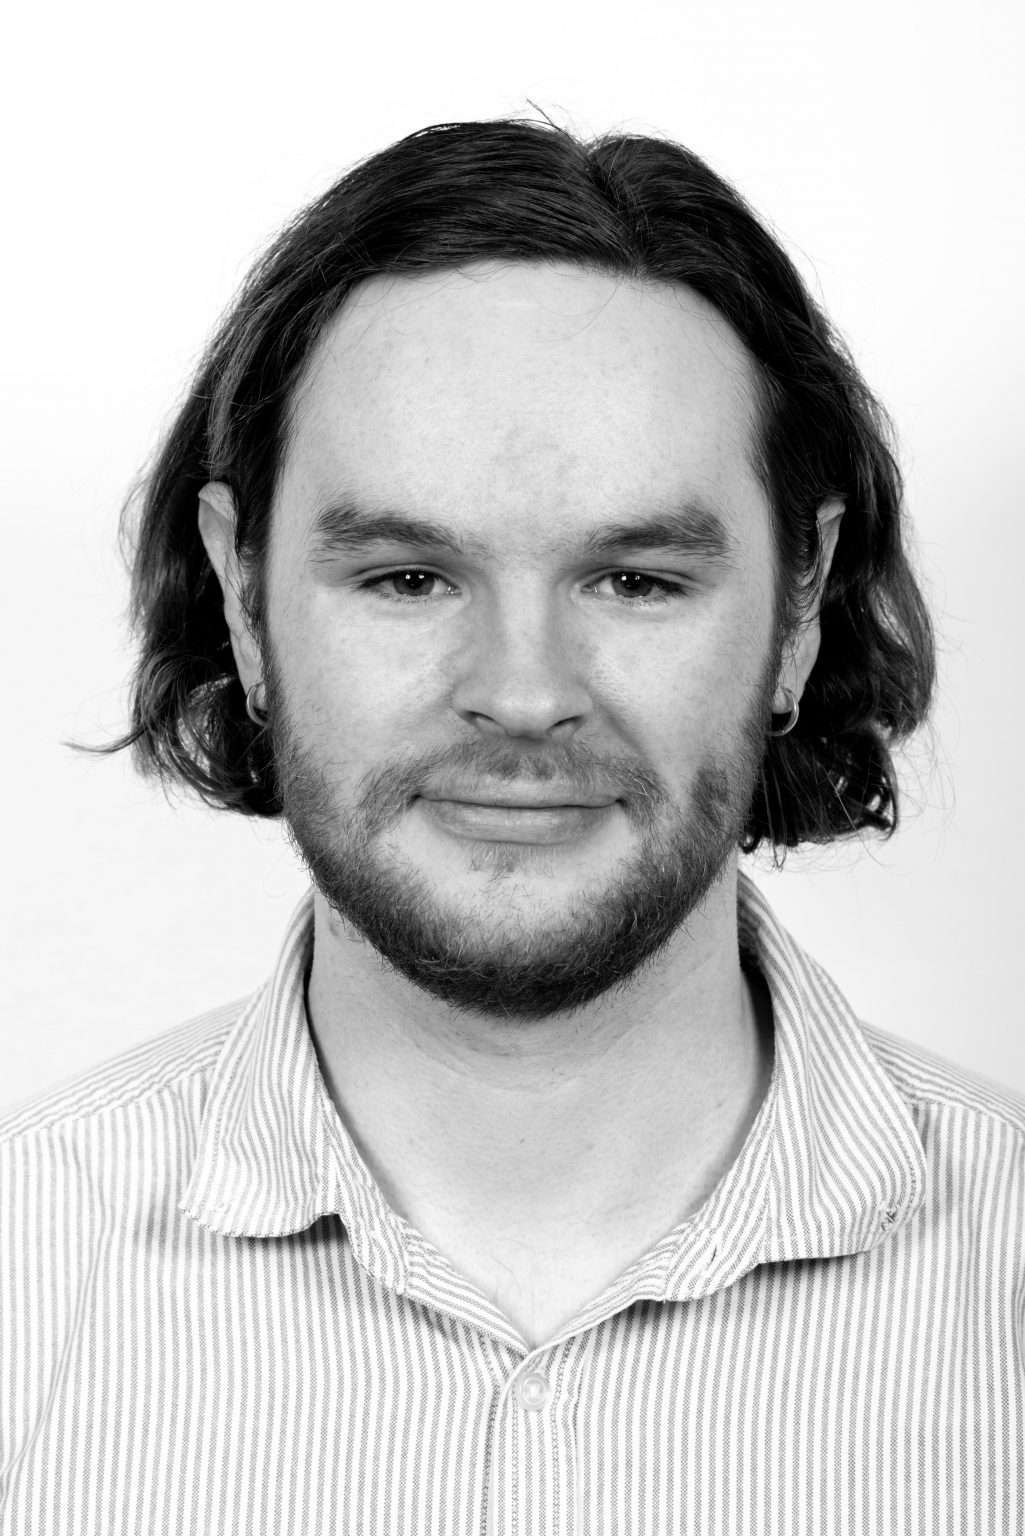 A headshot of our in-house Digital Designer and Editor, Tom Perrot